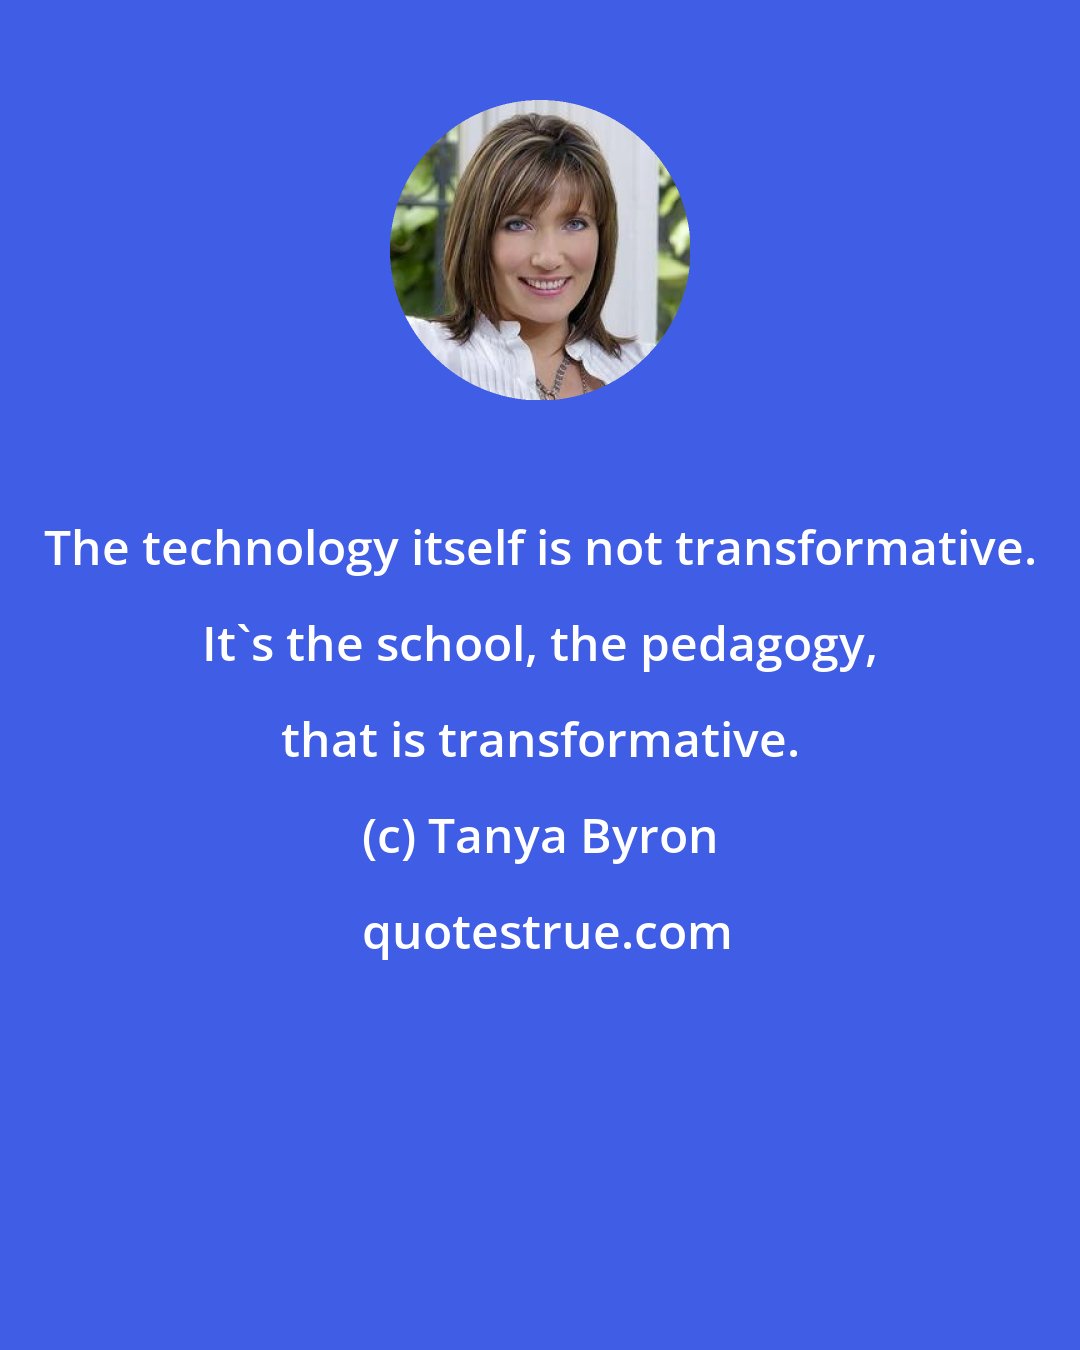 Tanya Byron: The technology itself is not transformative. It's the school, the pedagogy, that is transformative.